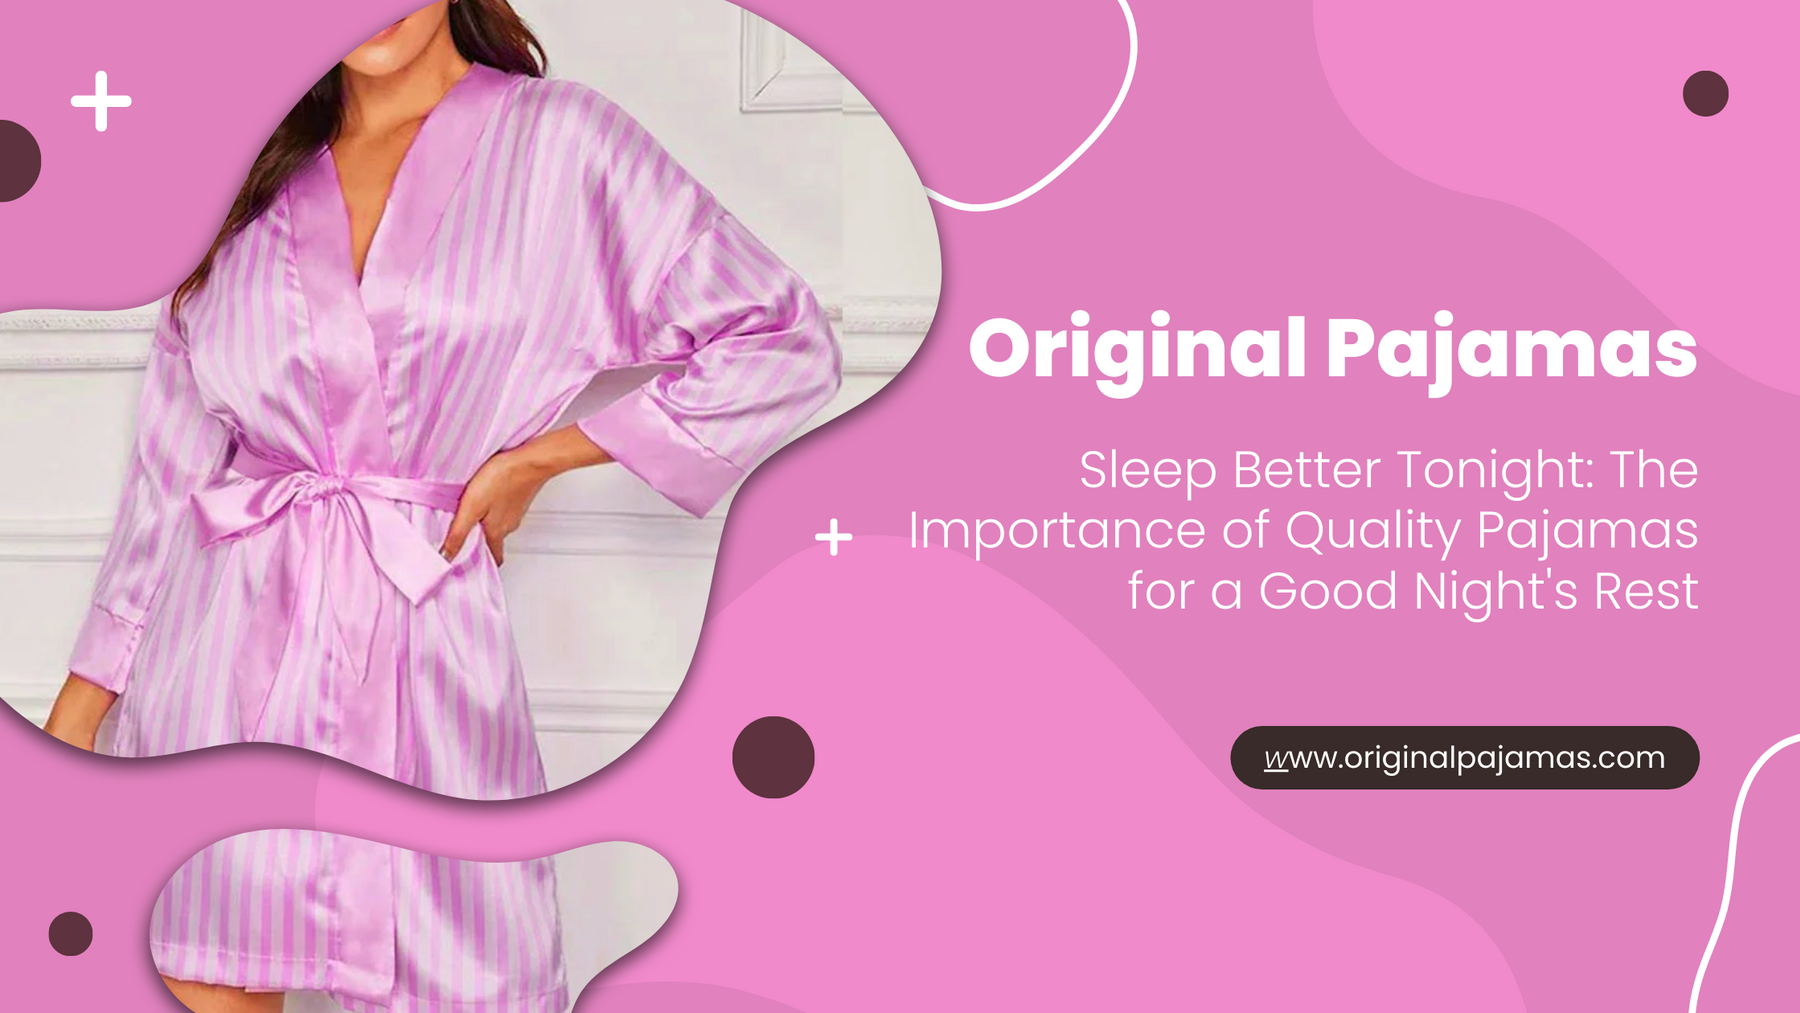 Sleep Better Tonight: The Importance of Quality Pajamas for a Good Night's Rest